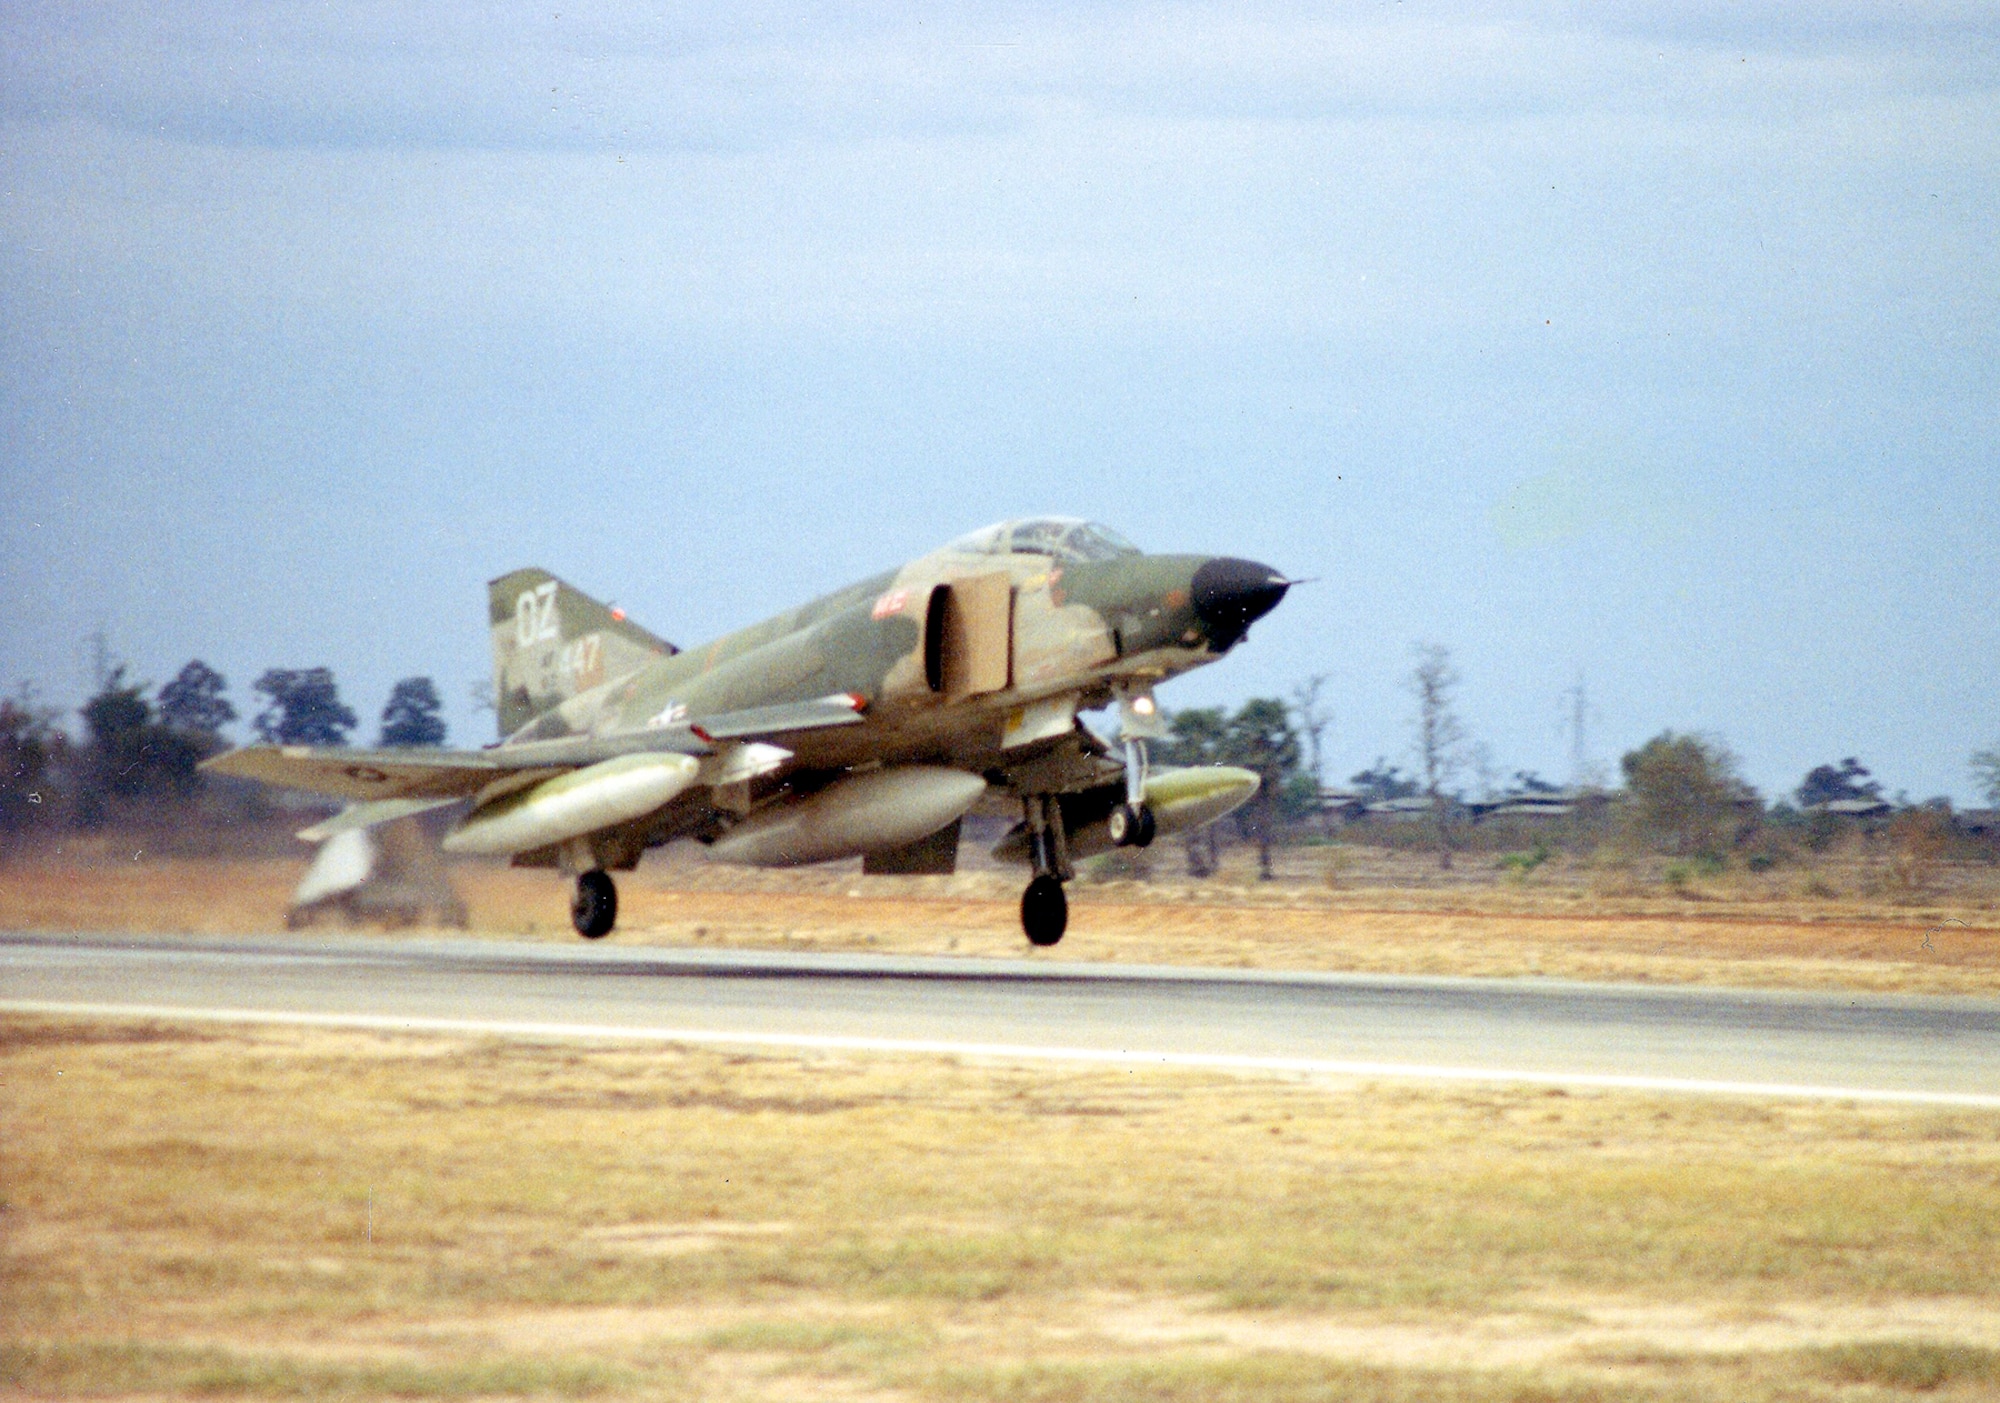 RF-4C of the 11th Tactical Reconnaissance Squadron based at Udorn, Thailand. (U.S. Air Force photo)